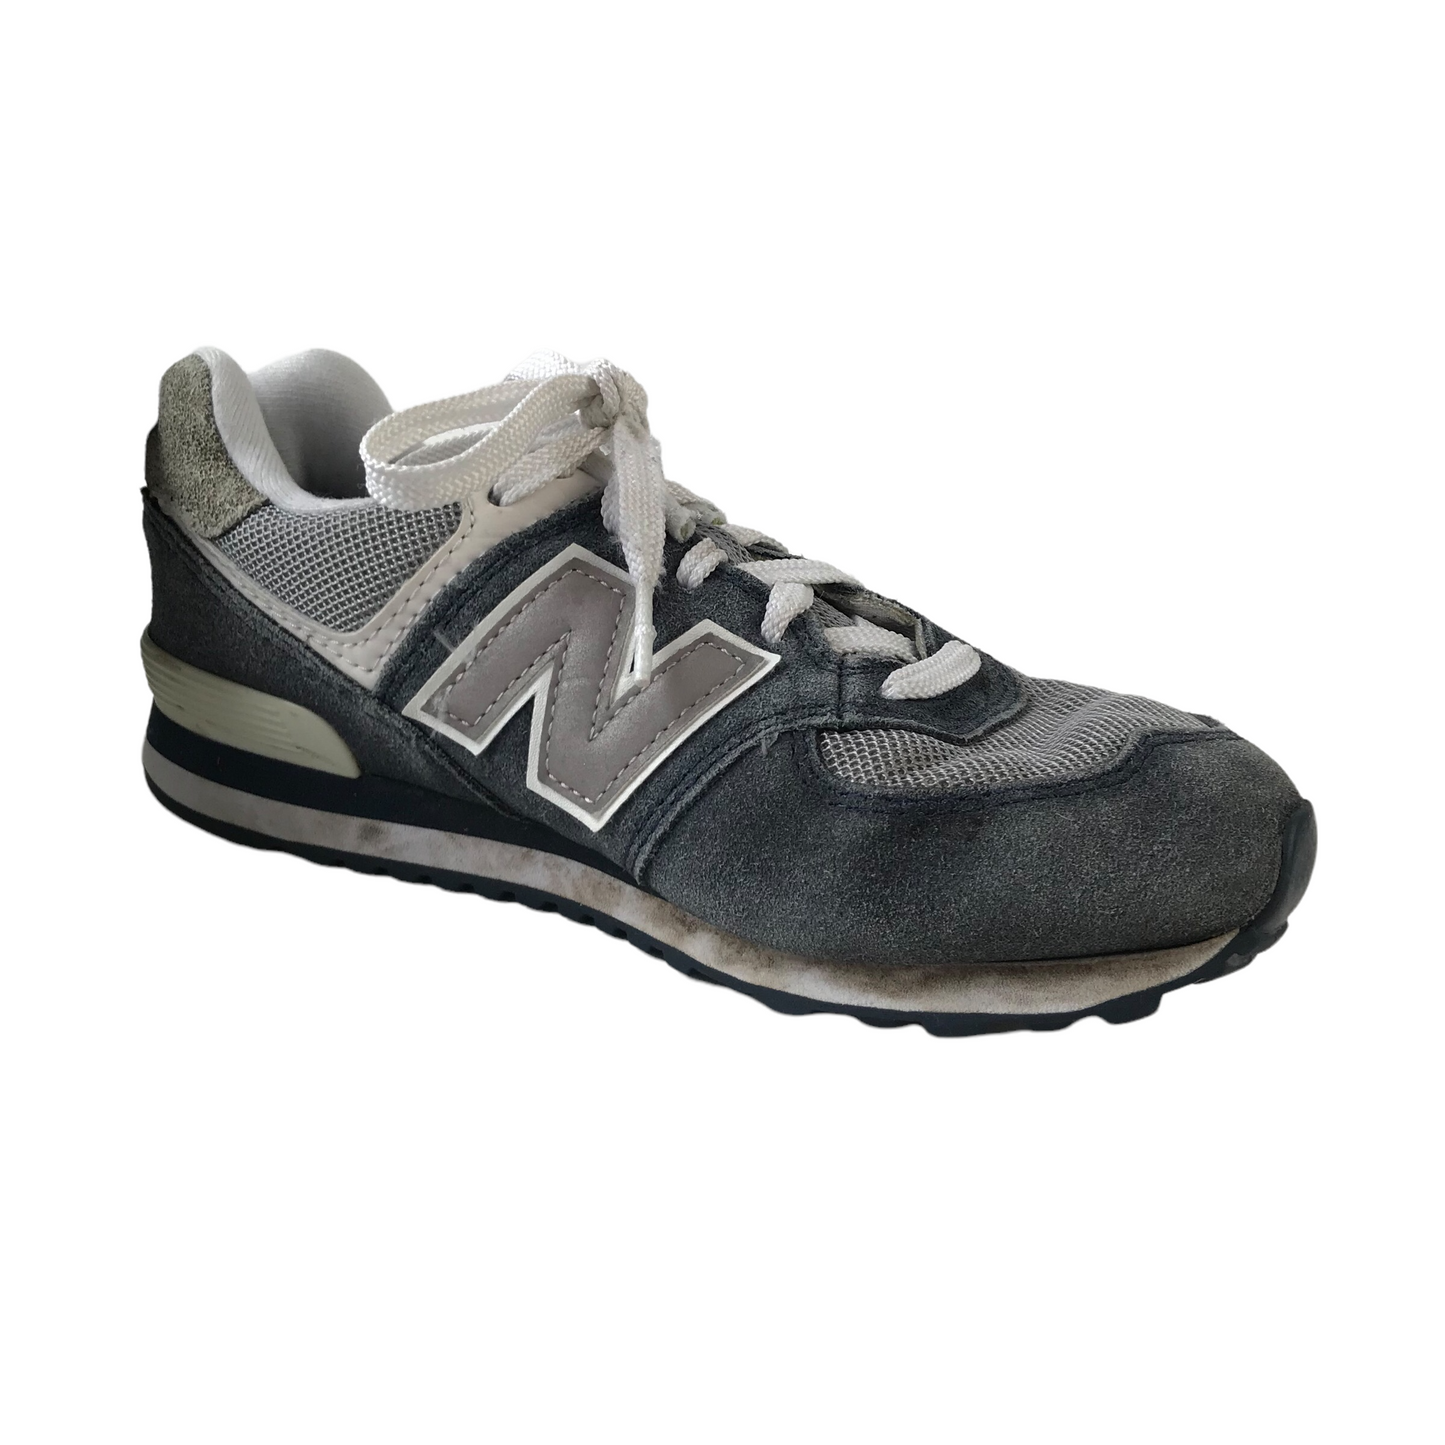 New Balance Navy Blue and Grey Trainers Size UK 3